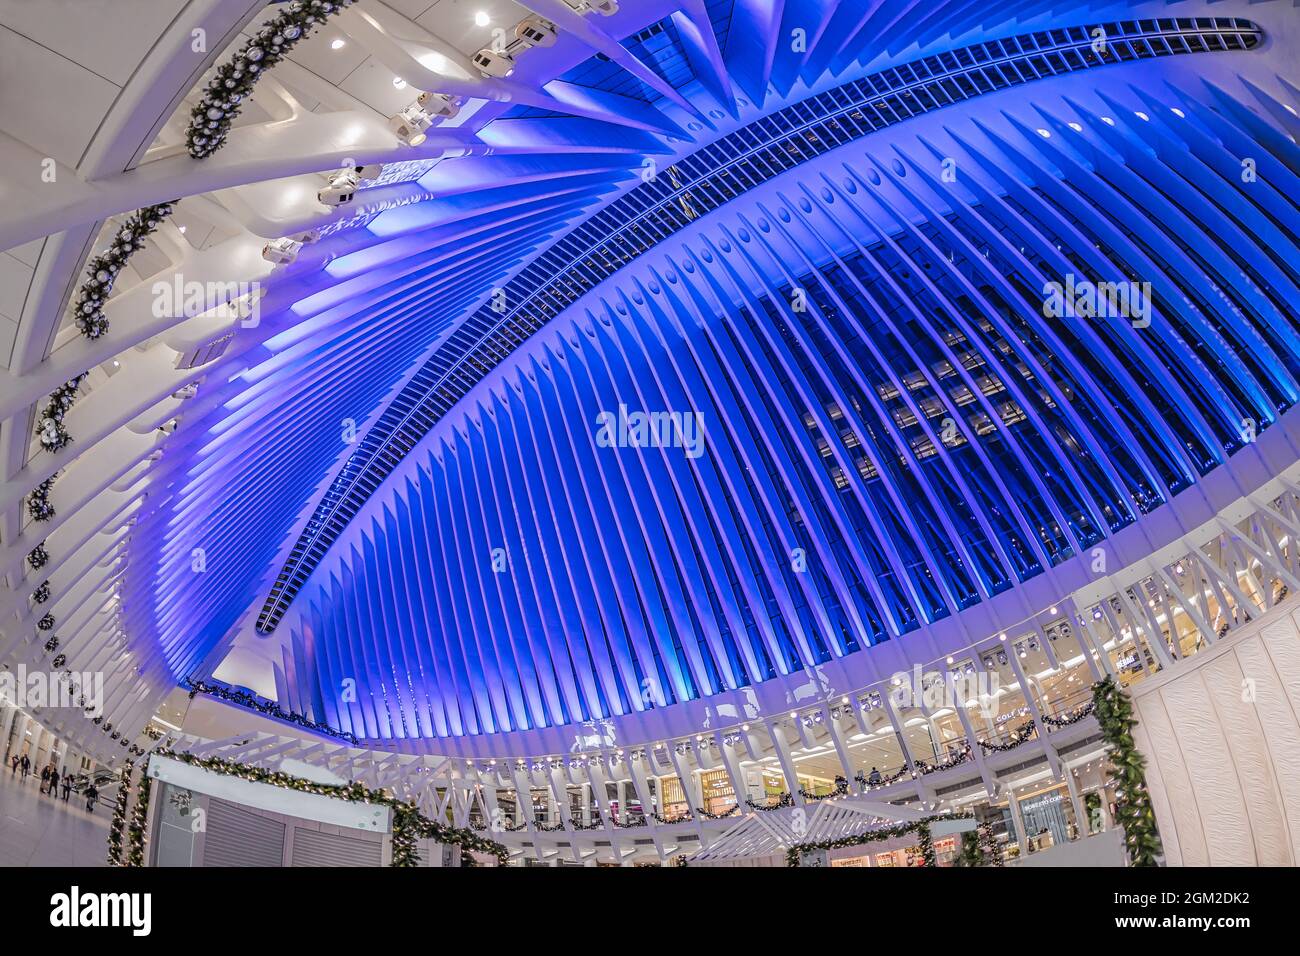 World Trade Center Station - The cathedral like pavilion at 4 World Trade Center in lower Manhattan in New York City during Christmas.   The station r Stock Photo